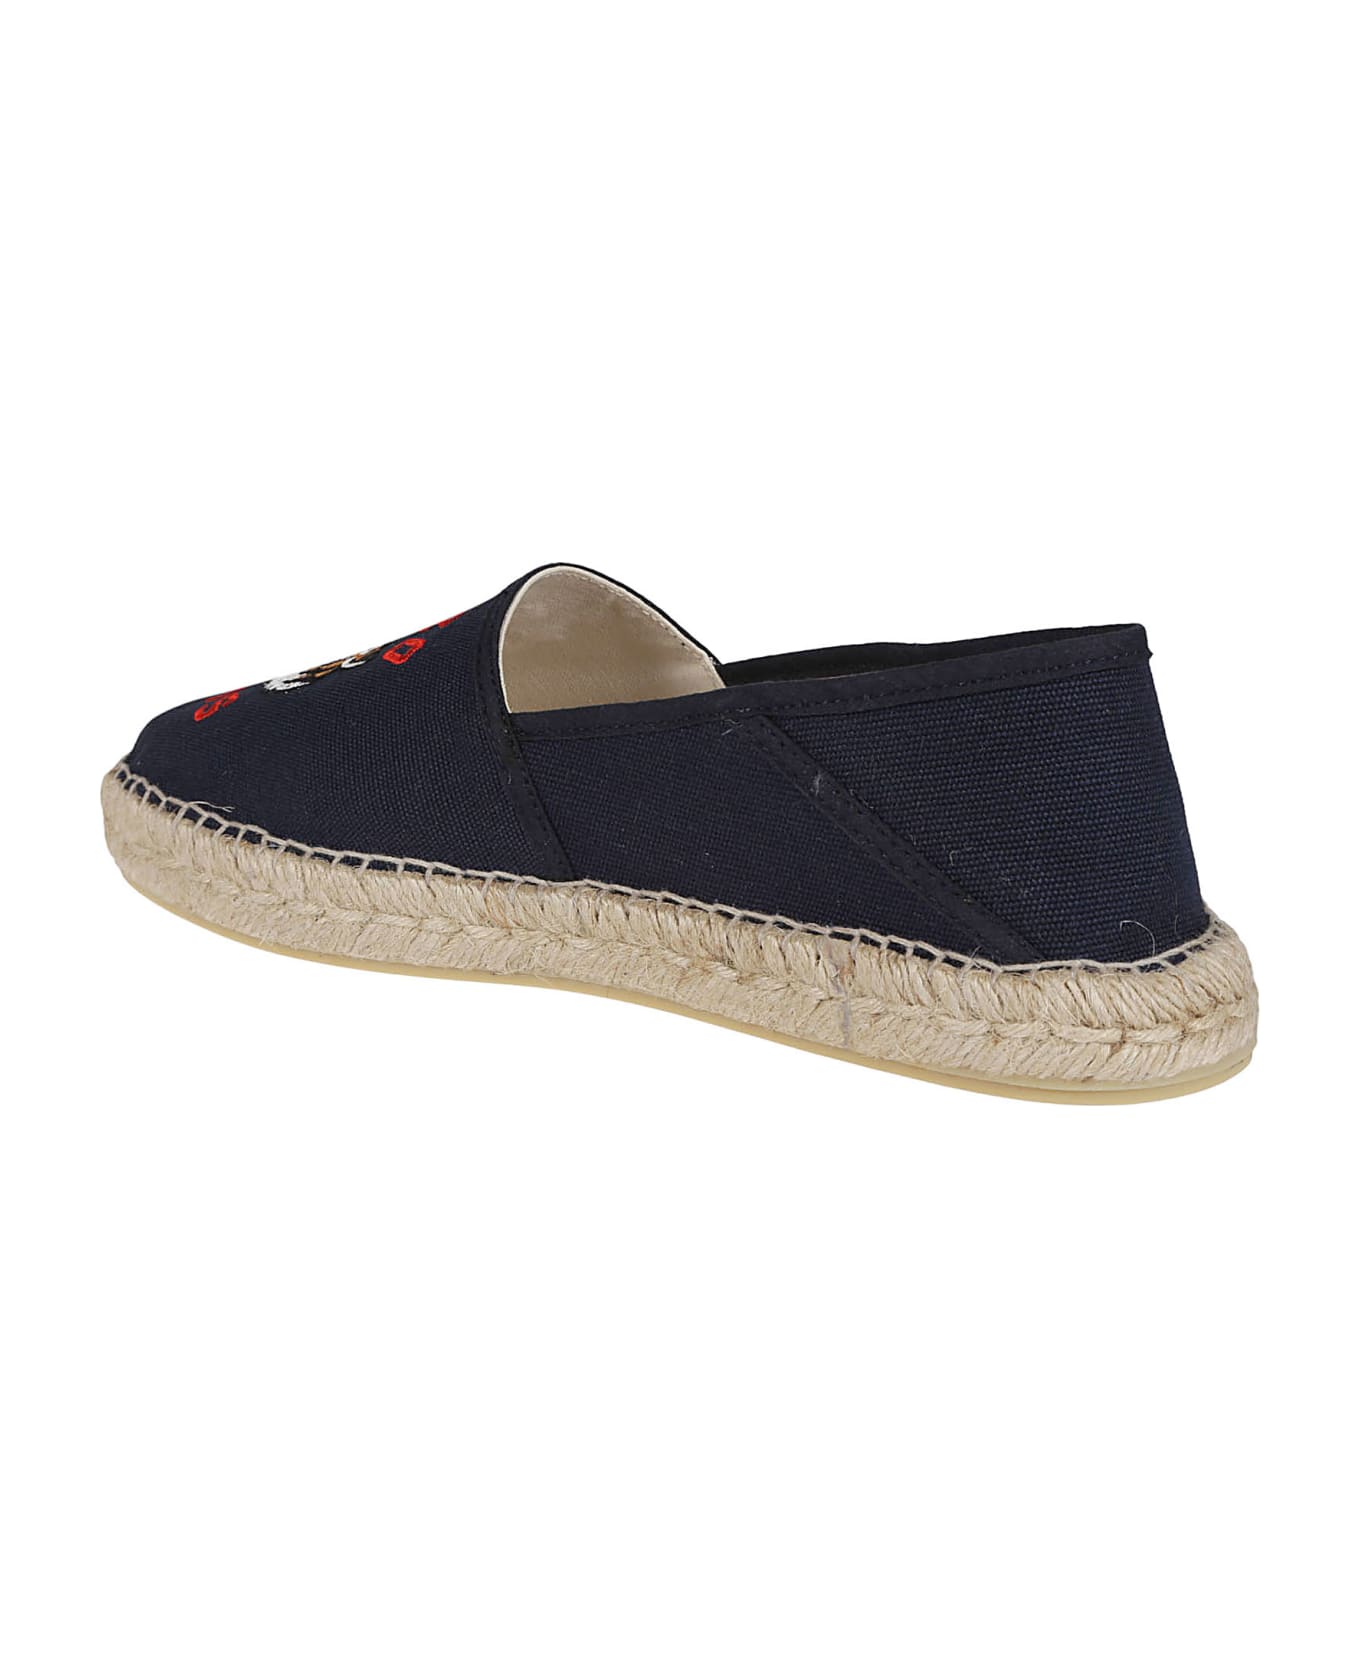 Kenzo Espadrille With Logo - Bleu Nuit その他各種シューズ